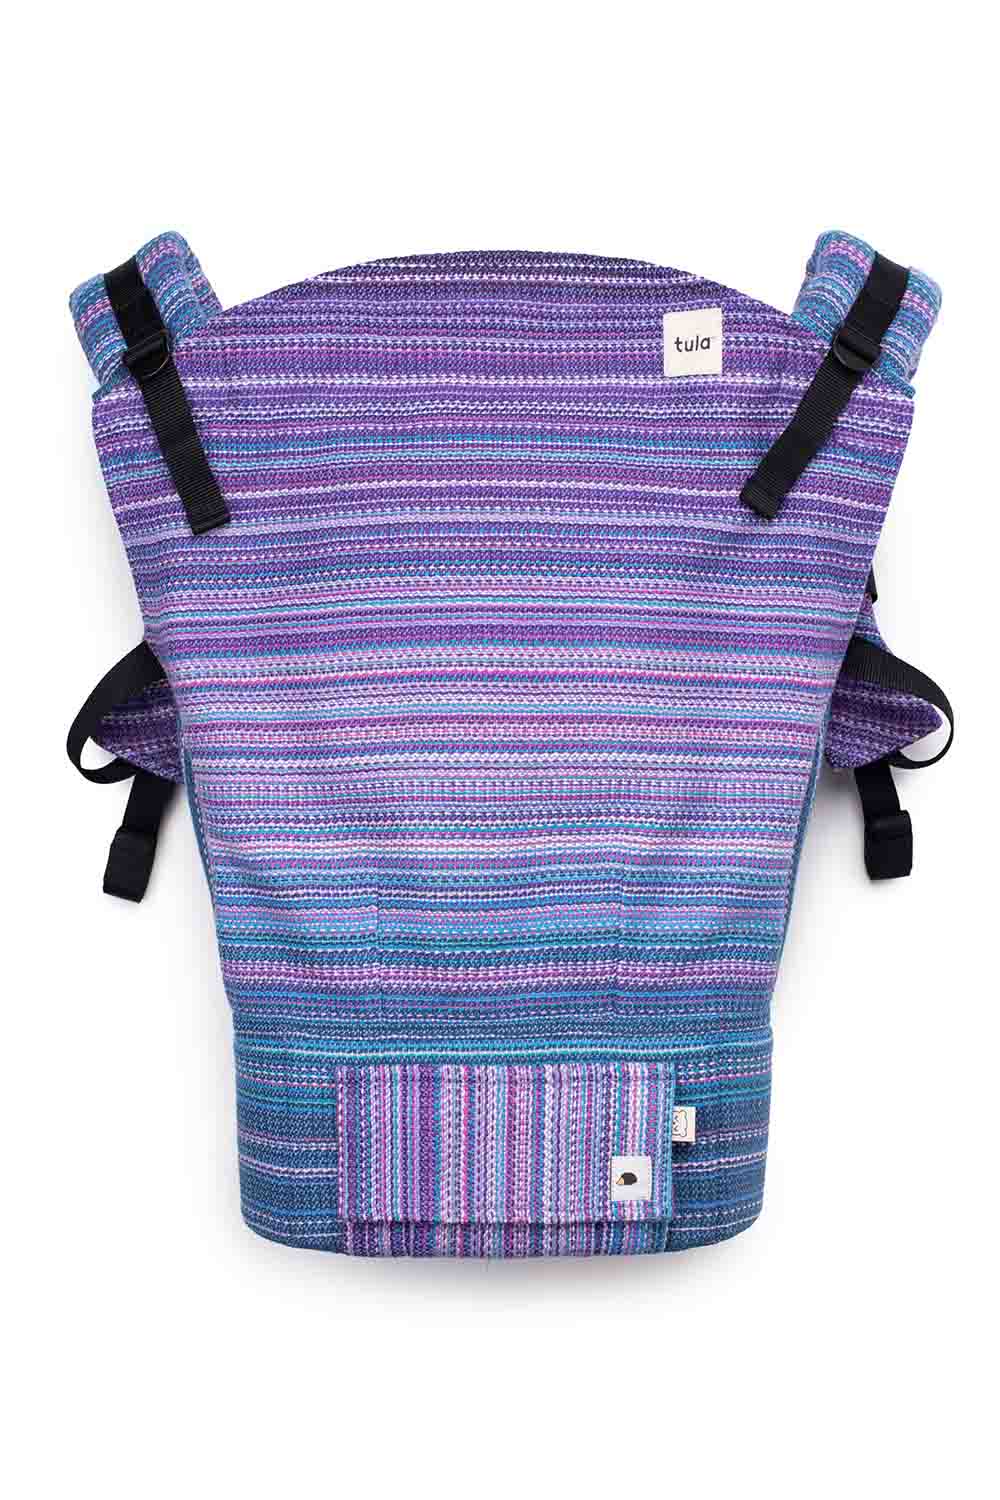 Orchid Galaxy - Signature Handwoven Toddler Baby Carrier